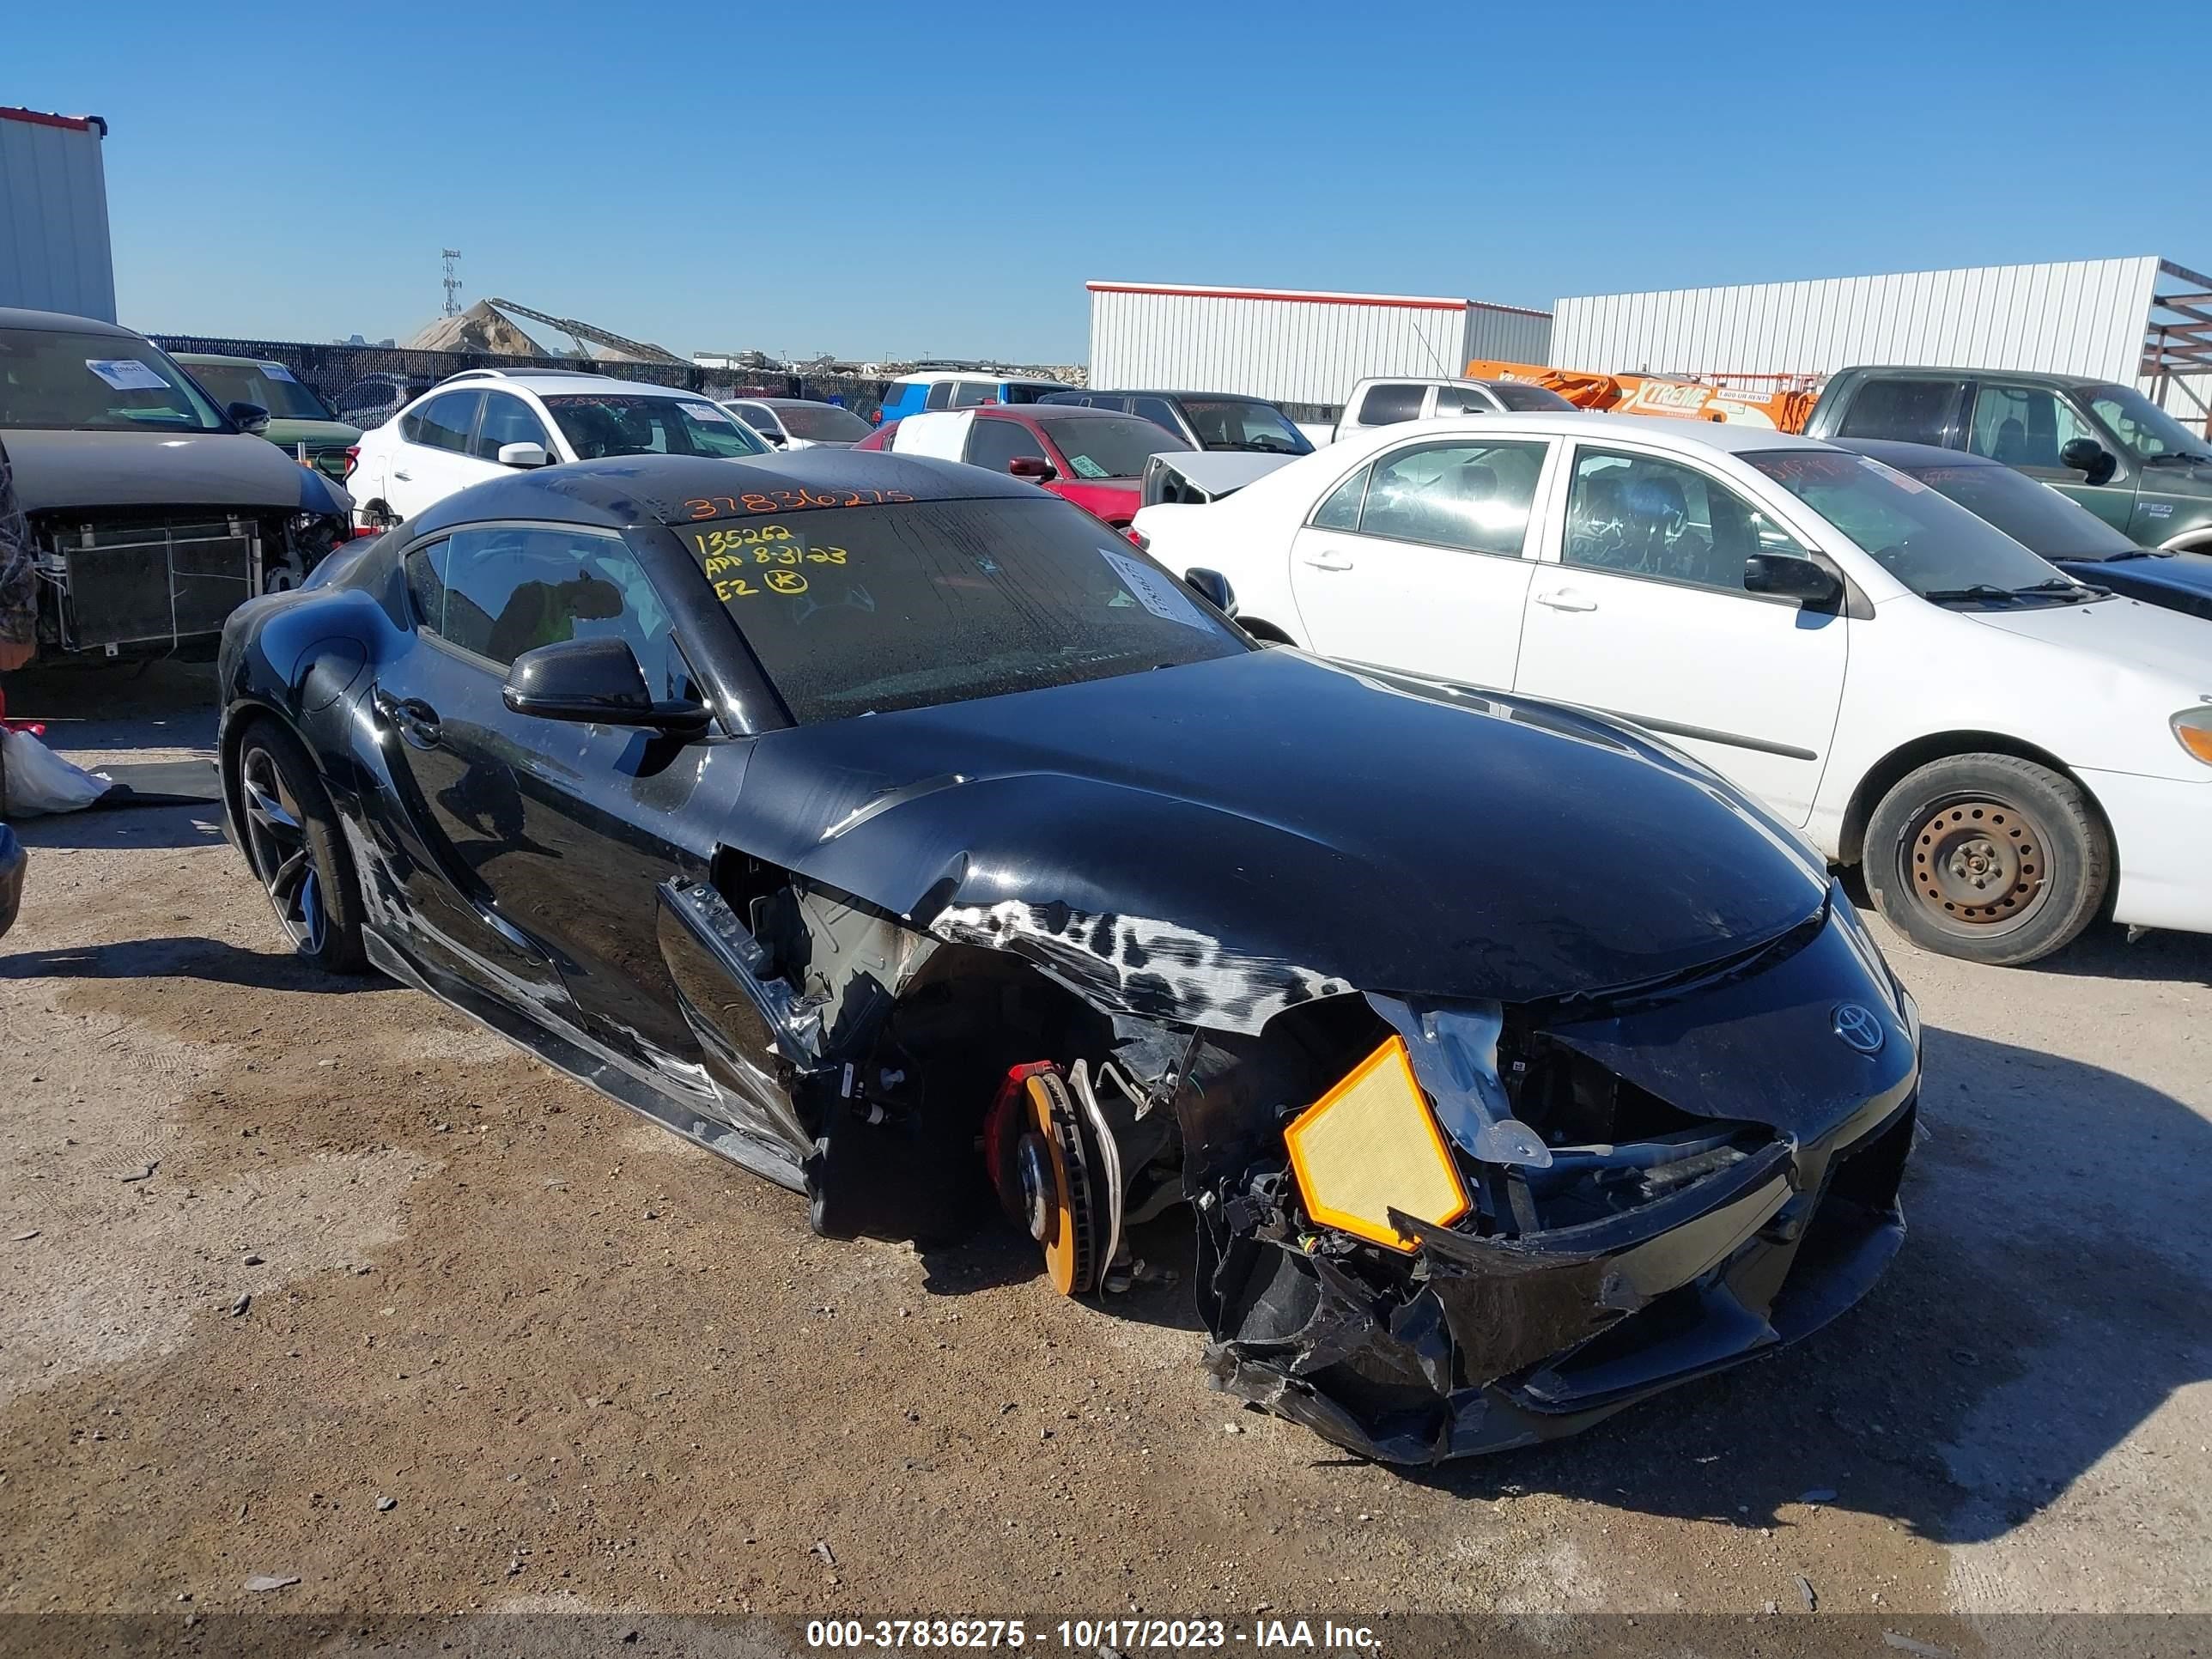 vin: WZ1DB0C01NW053710 WZ1DB0C01NW053710 2022 toyota supra 3000 for Sale in 76247, 3748 Mcpherson Dr, Justin, USA